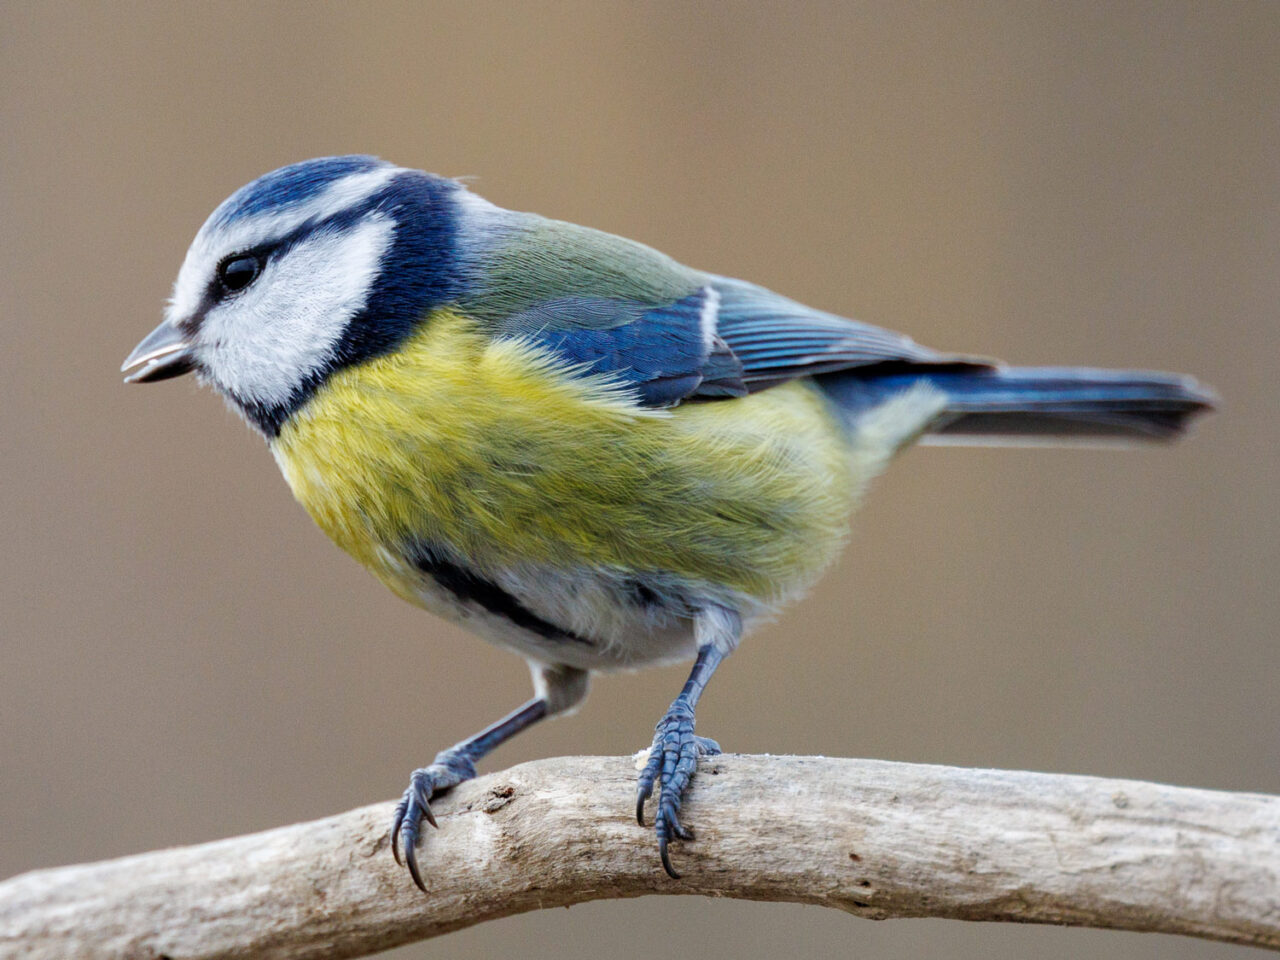 A small blue and yellow bird with a white face perches on a branch.